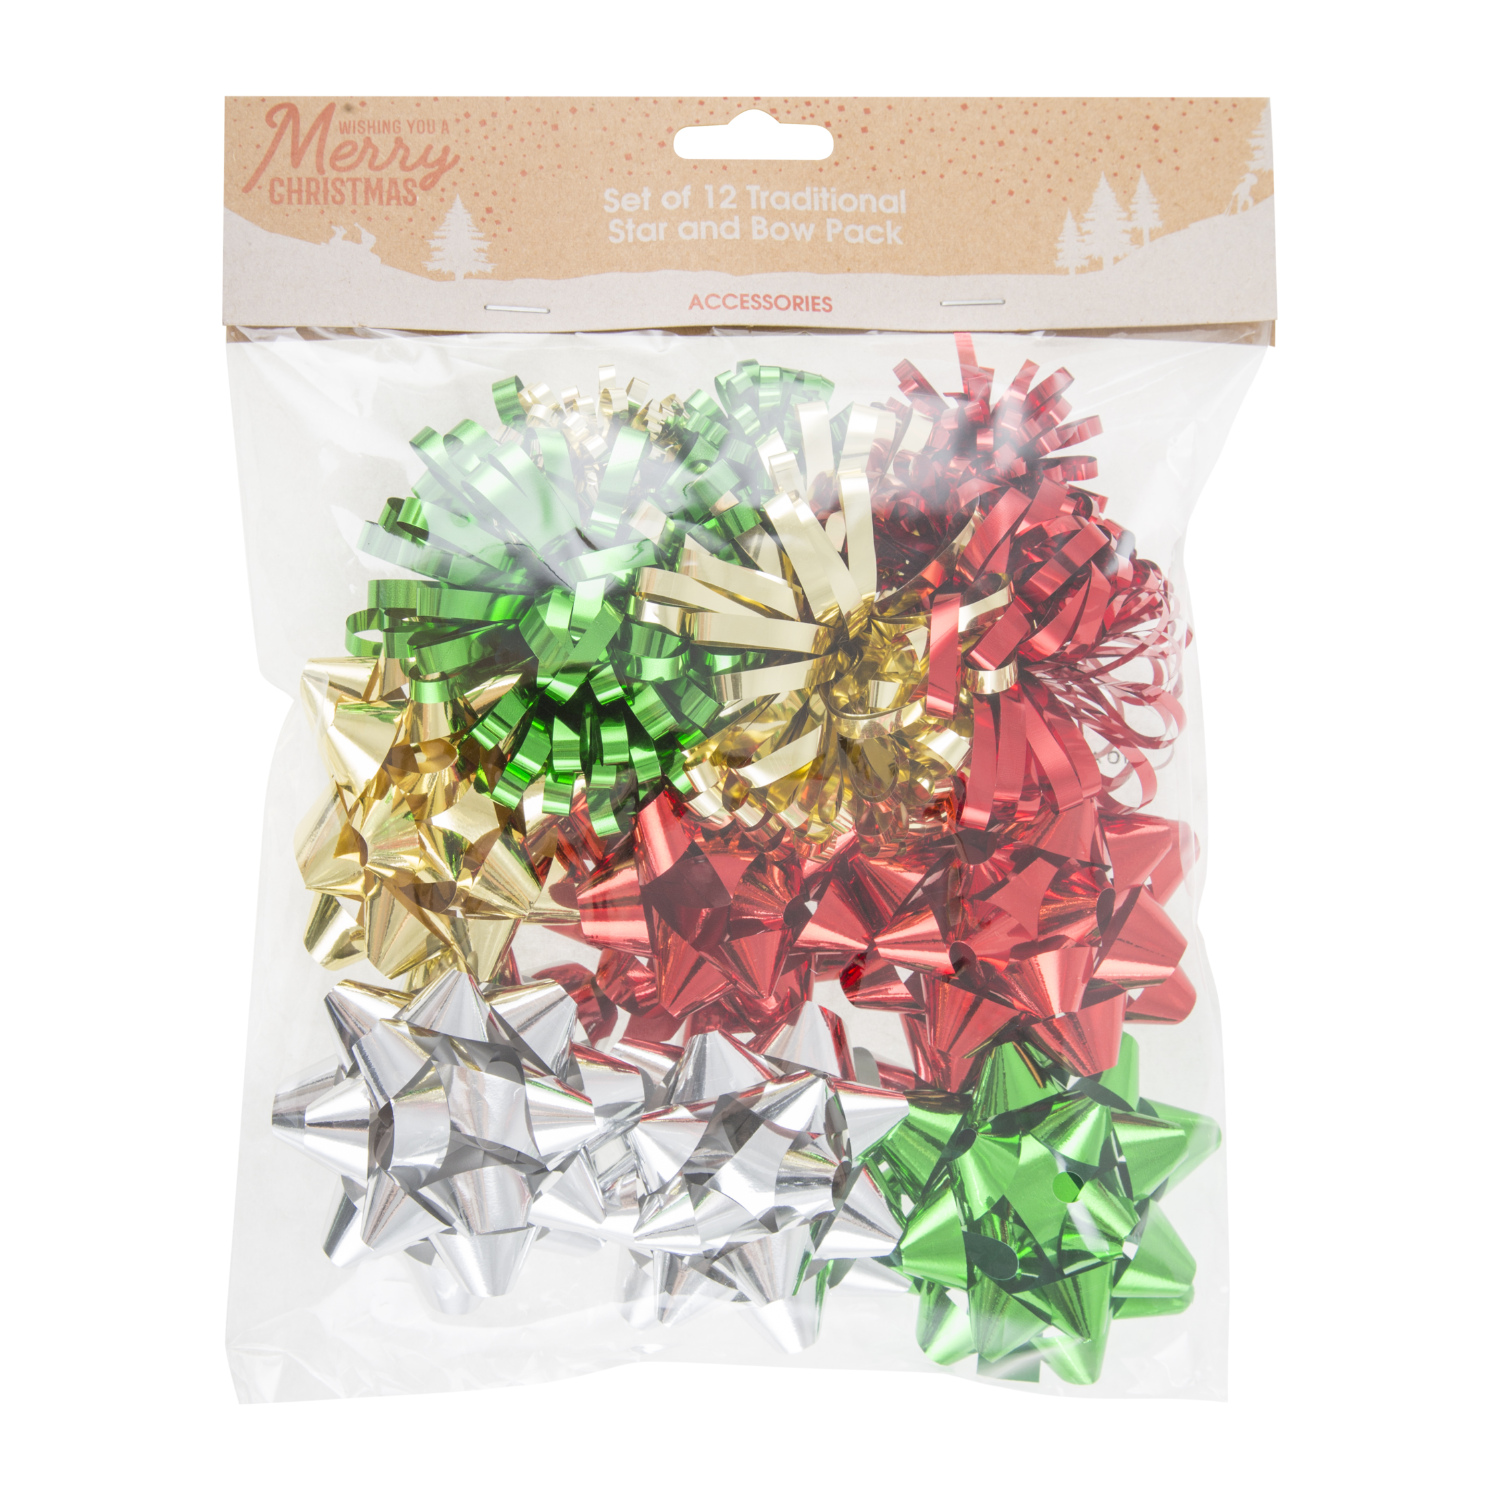 Set of 12 Traditional Bow and Star Gift Accessory Pack Image